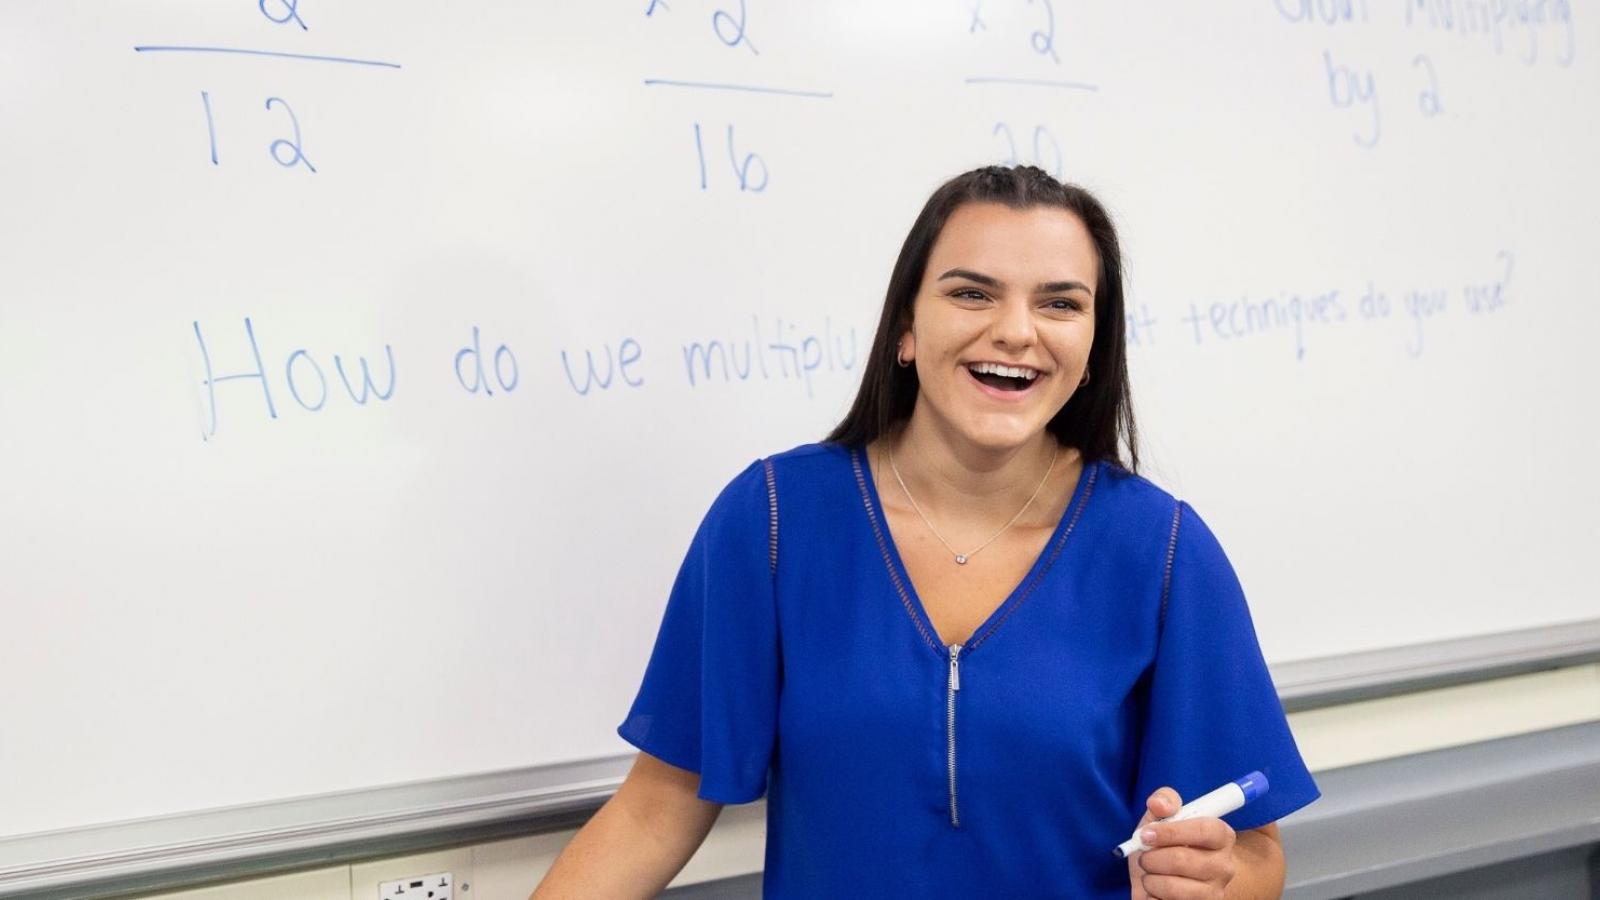 college girl laughing in front of whiteboard holding a blue marker